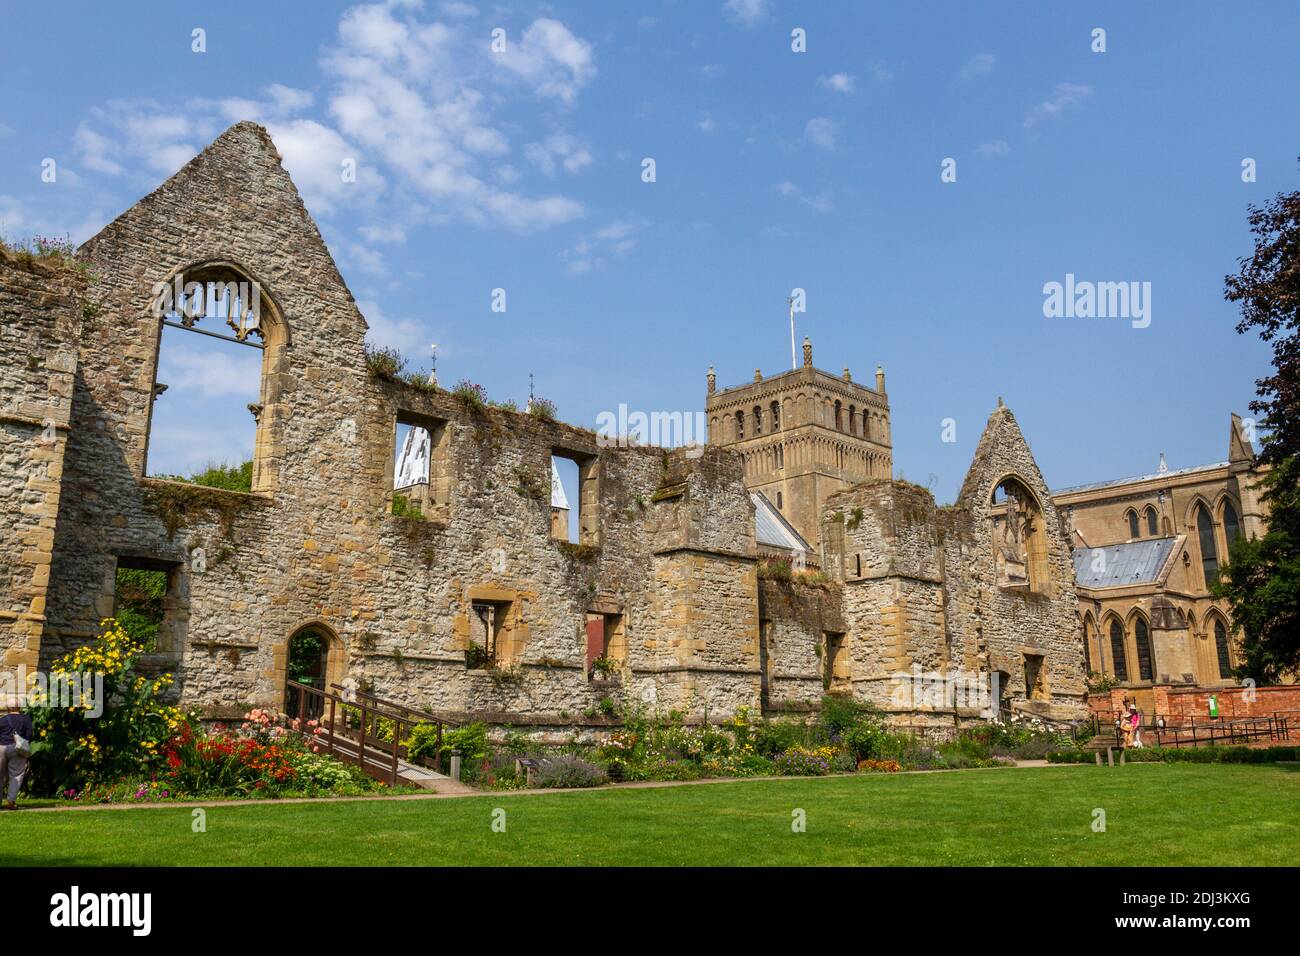 The Palace Ruins in the Education Garden, Southwell Minster, Southwell, Nottinghamshire, UK. Stock Photo